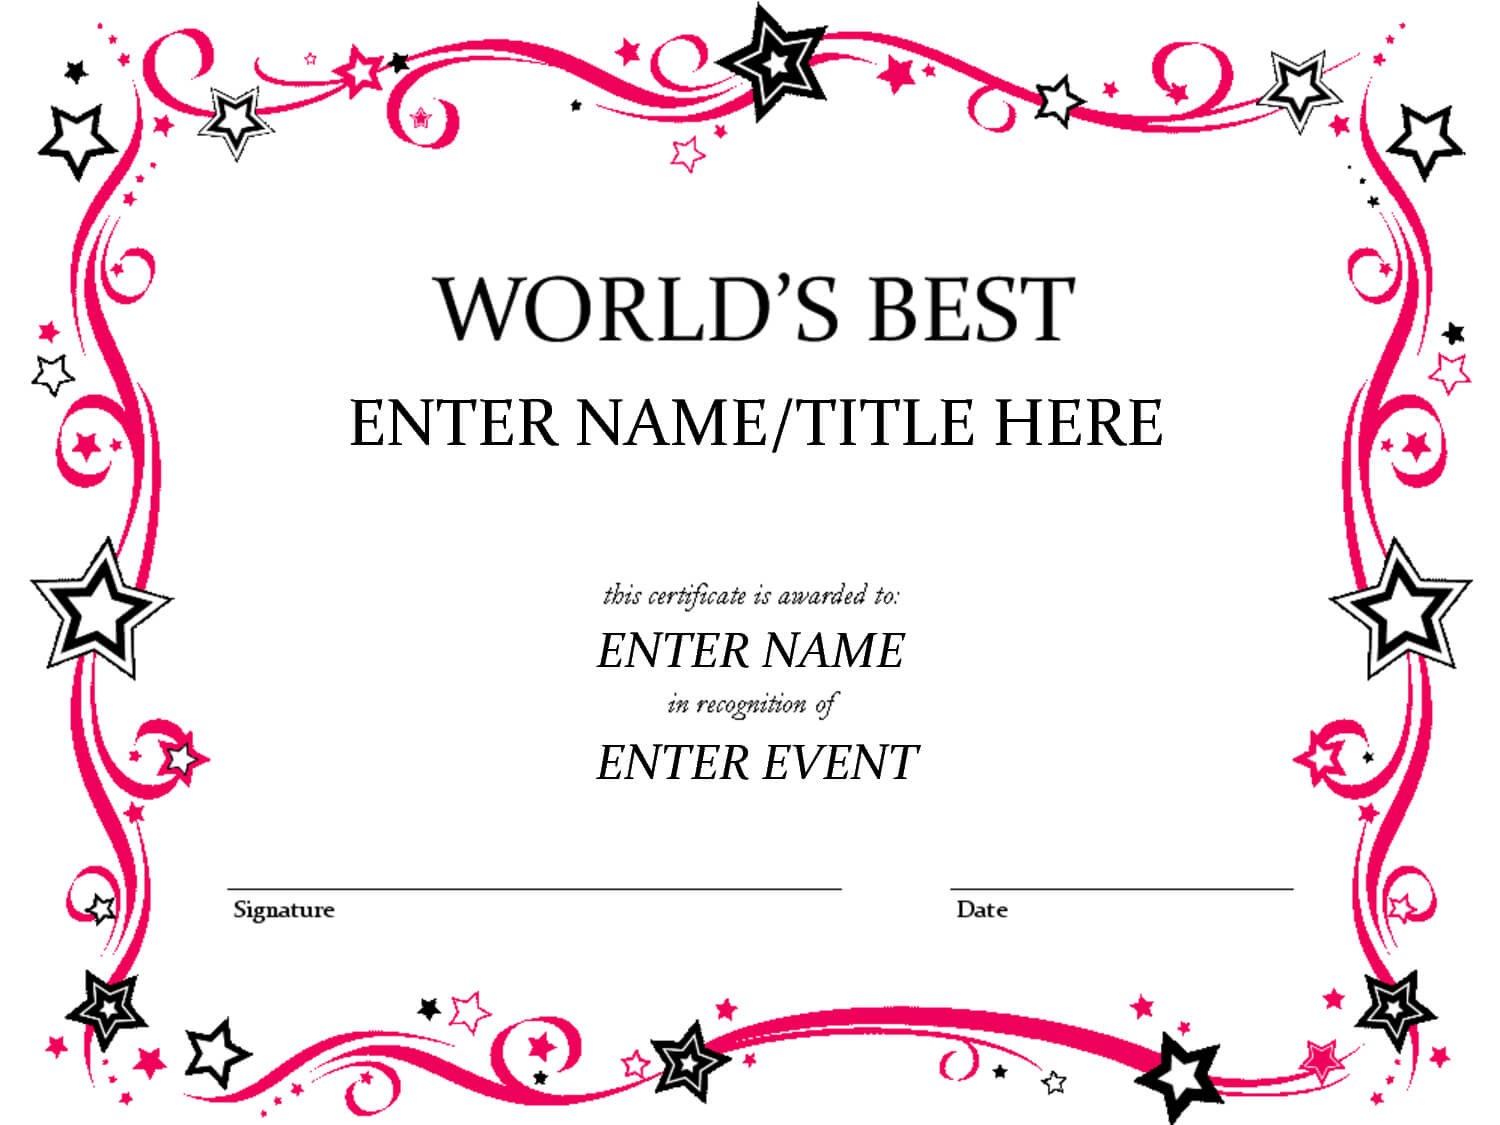 Pages Certificate Templates - Invitation Templates - Clip Intended For Pages Certificate Templates